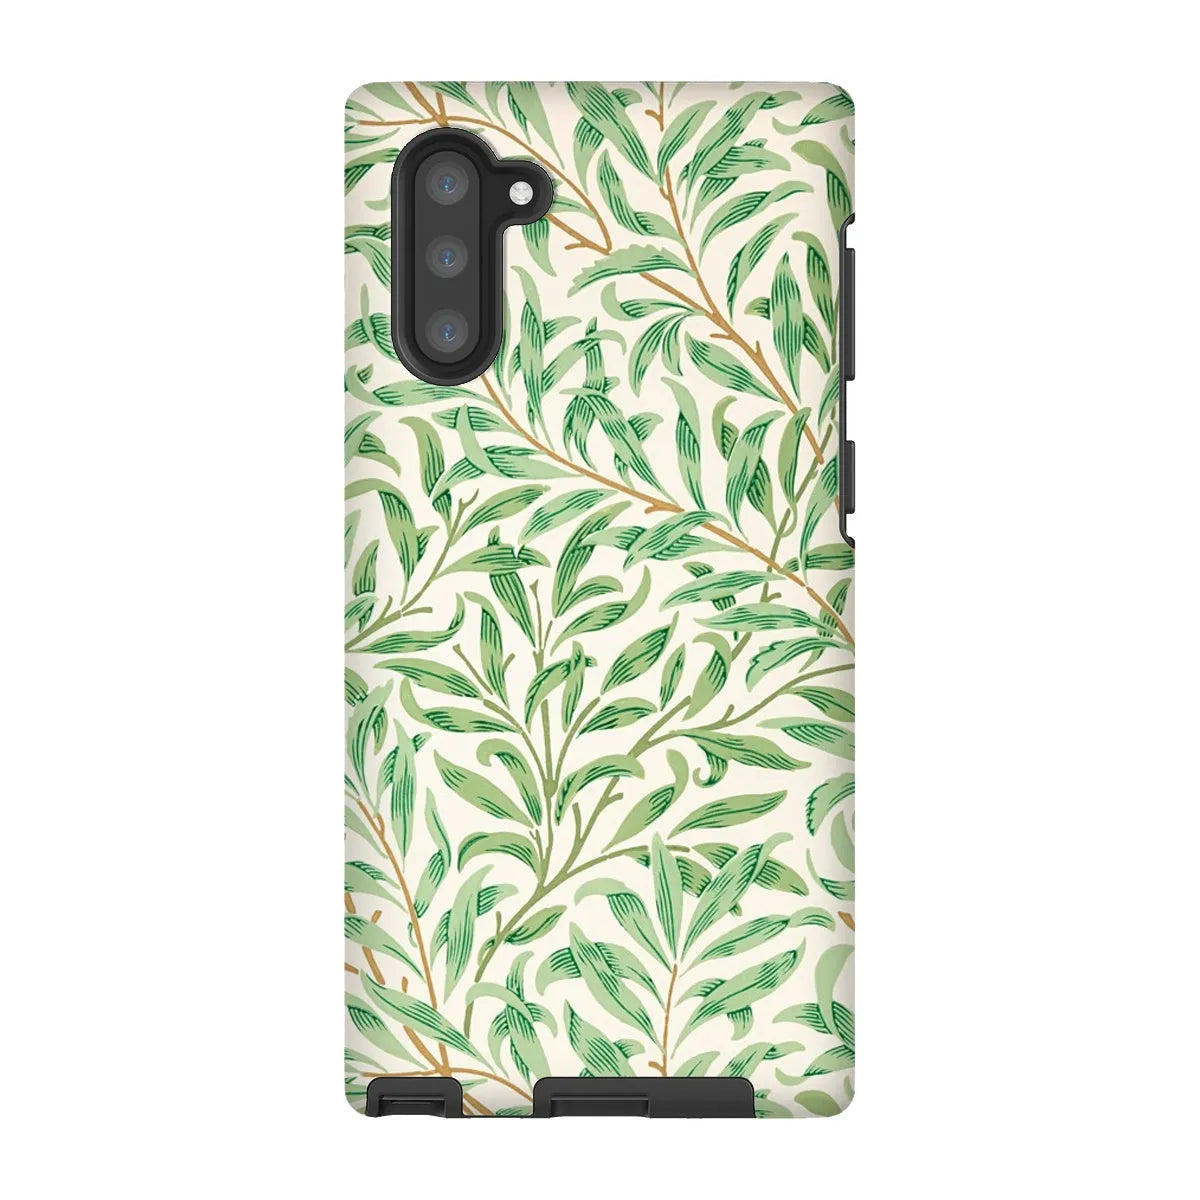 Willow Bough - Botanical Aesthetic Phone Case - William Morris - Samsung Galaxy Note 10 / Matte - Mobile Phone Cases